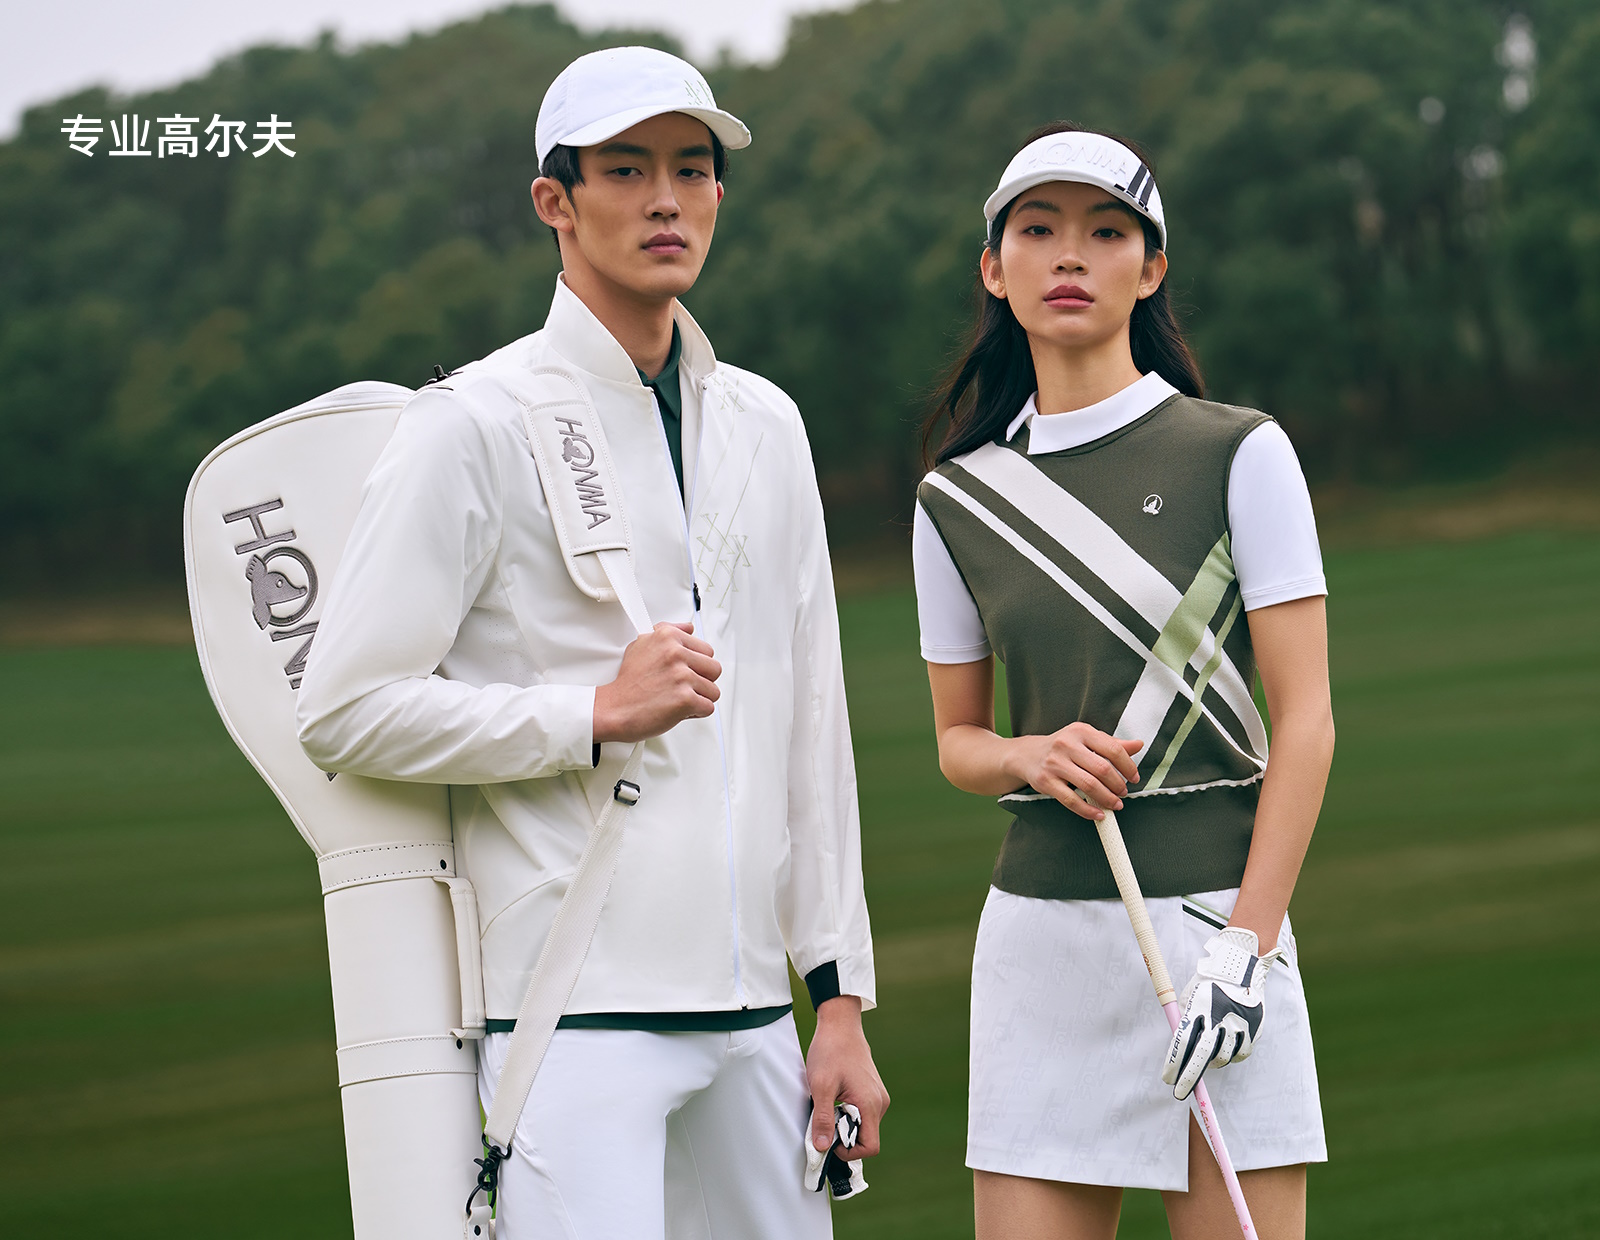 Honma Golf Men's Clothing and Apparel Collection